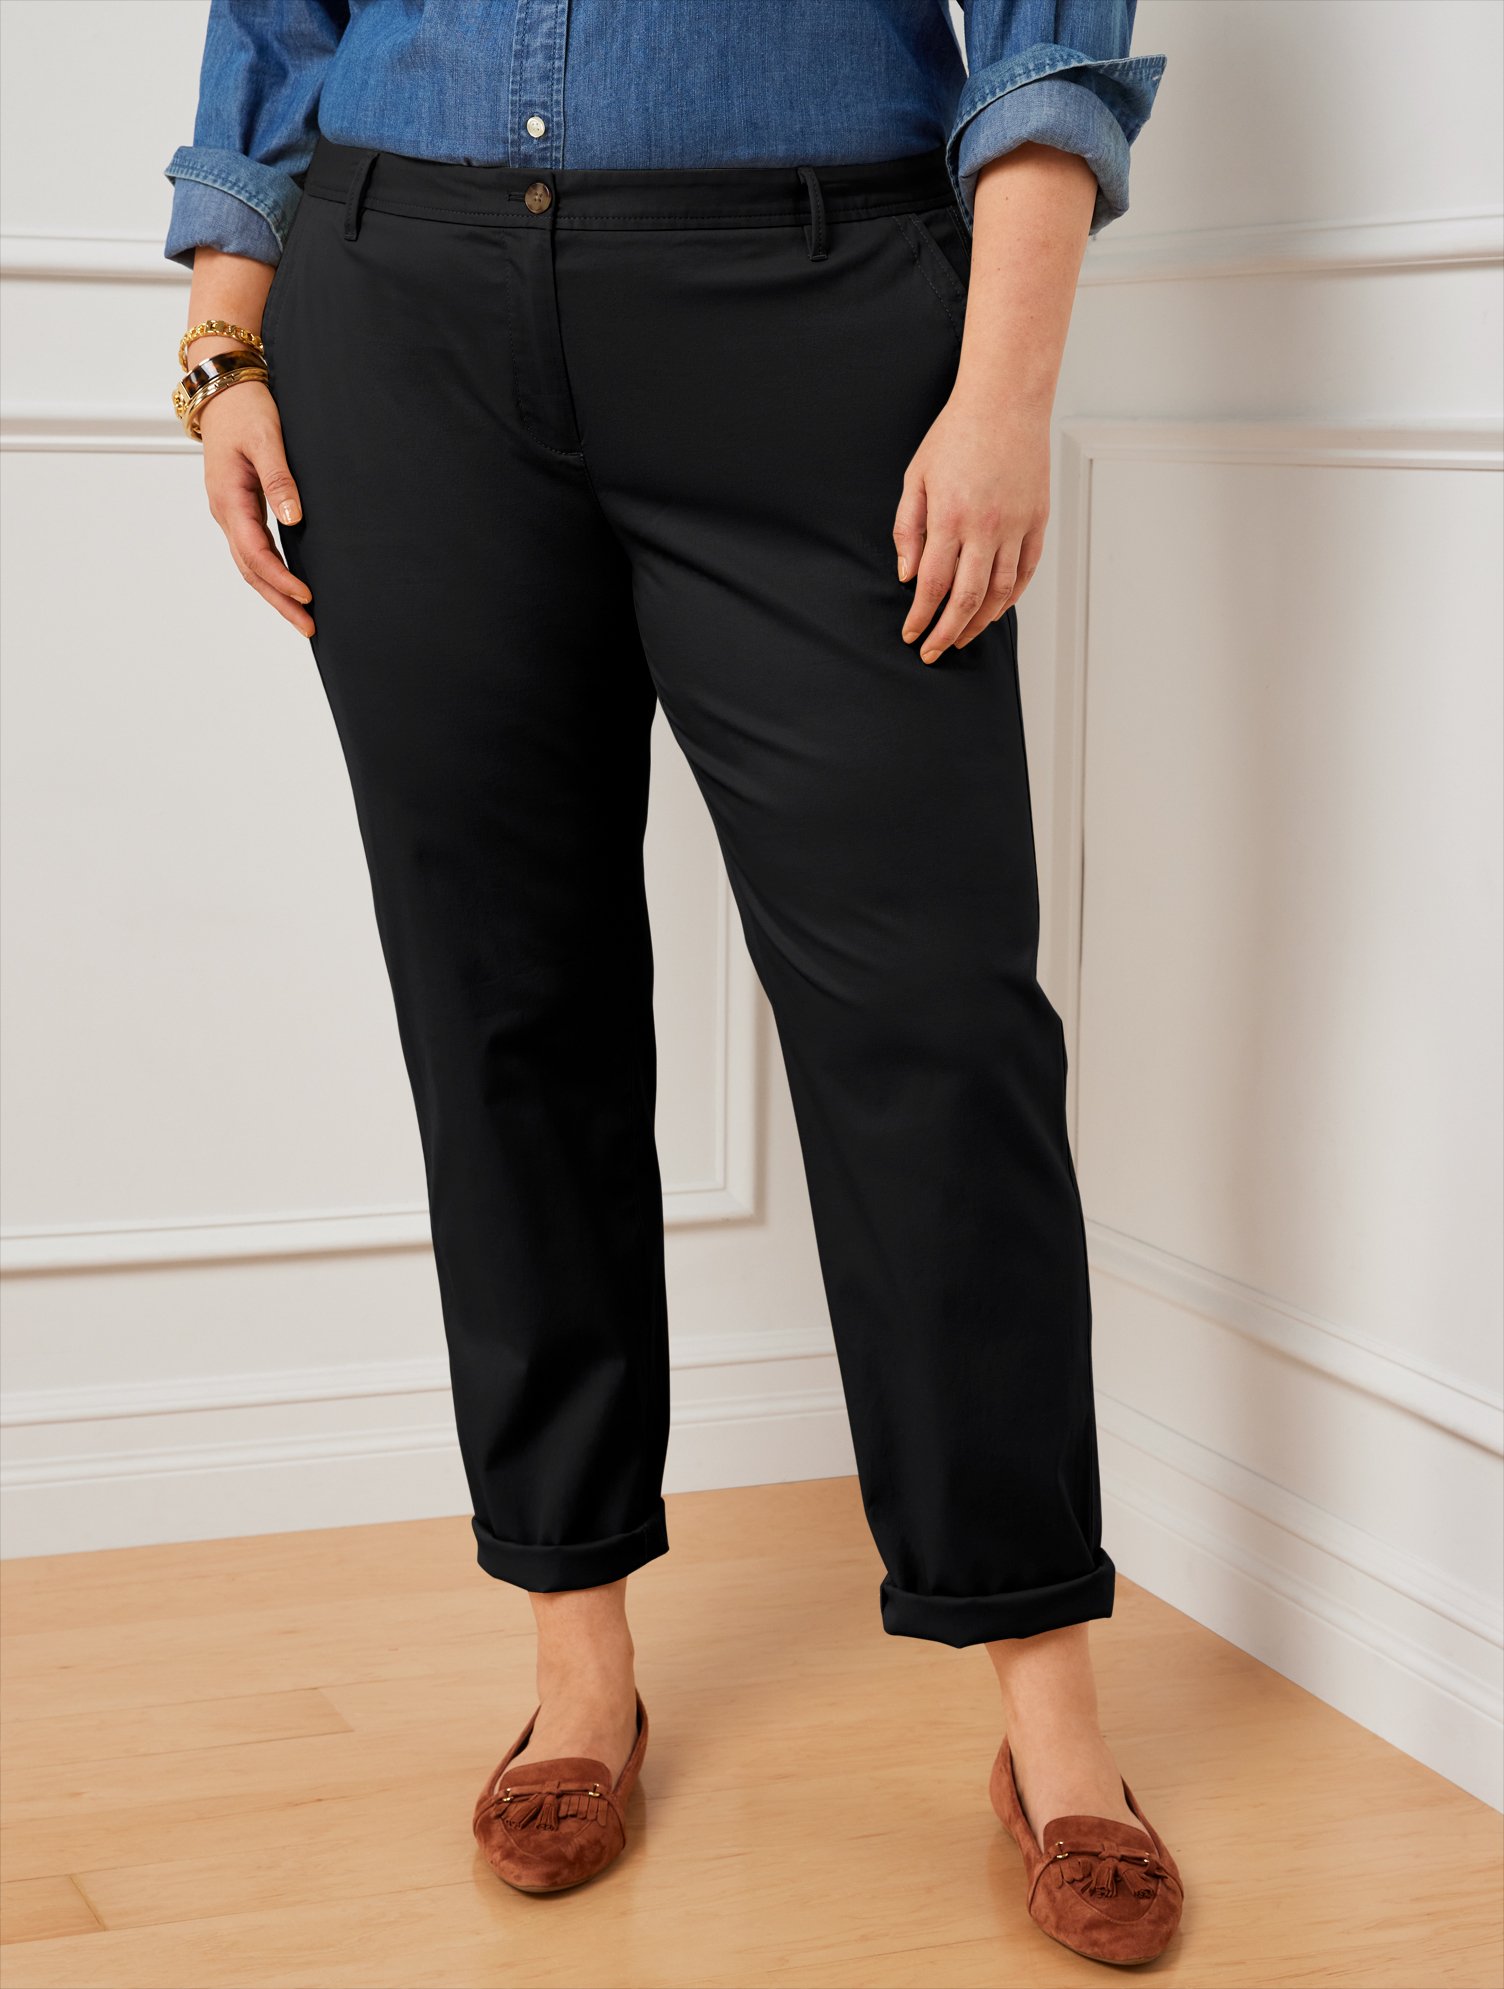 Talbots Relaxed Chinos Pants - Black - 22